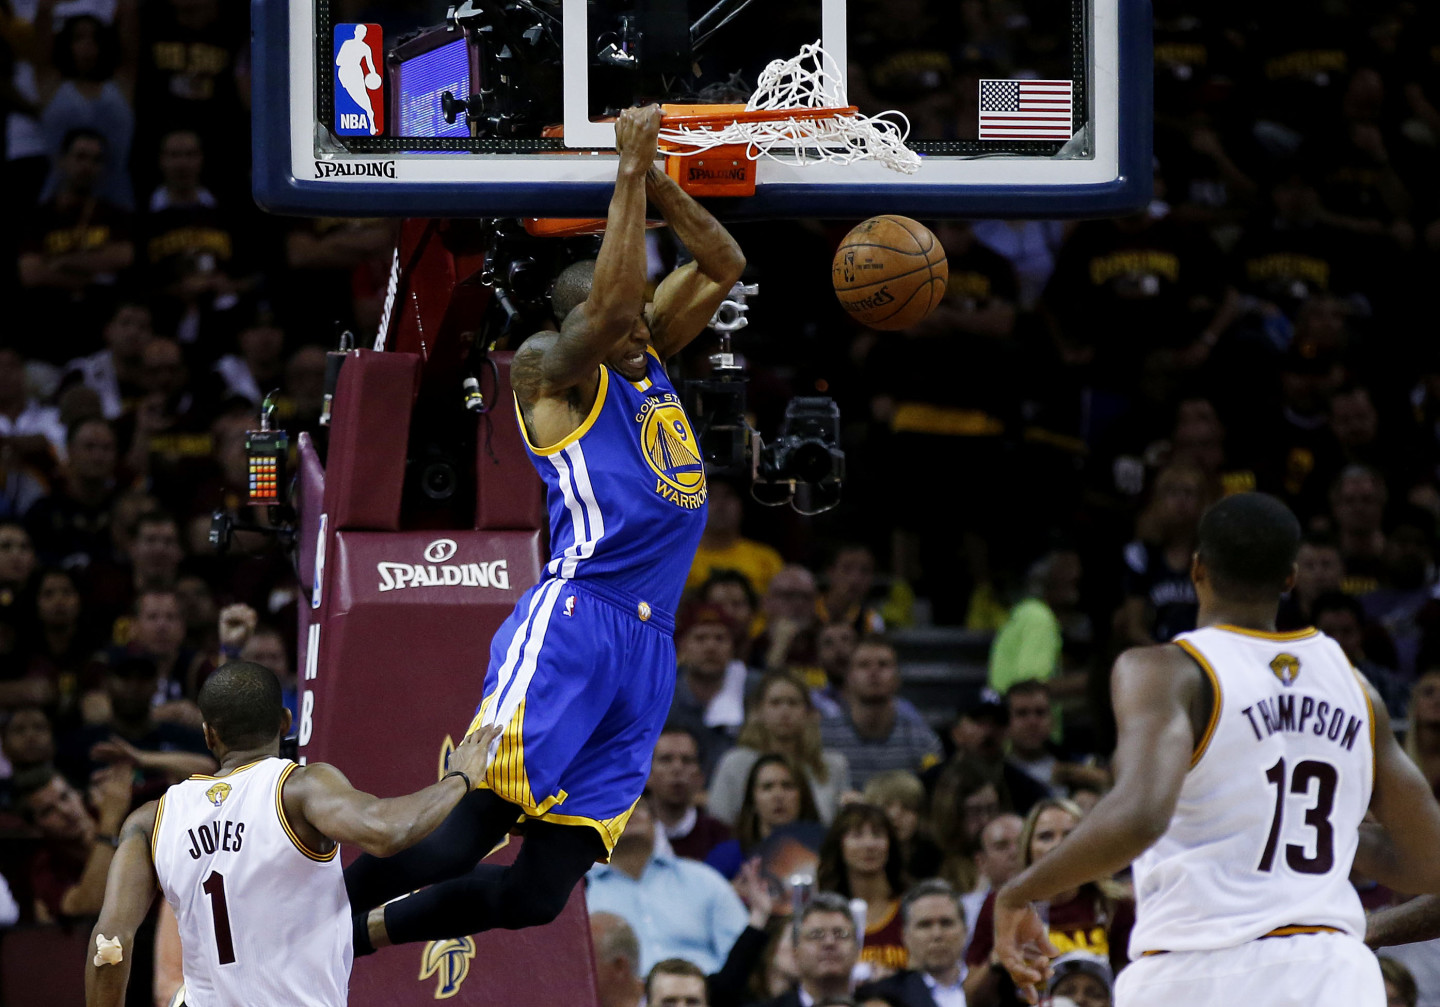 Finals MVP Andre Iguodala had an incredible game, scoring 25 points while keeping LeBron James in check on defense.